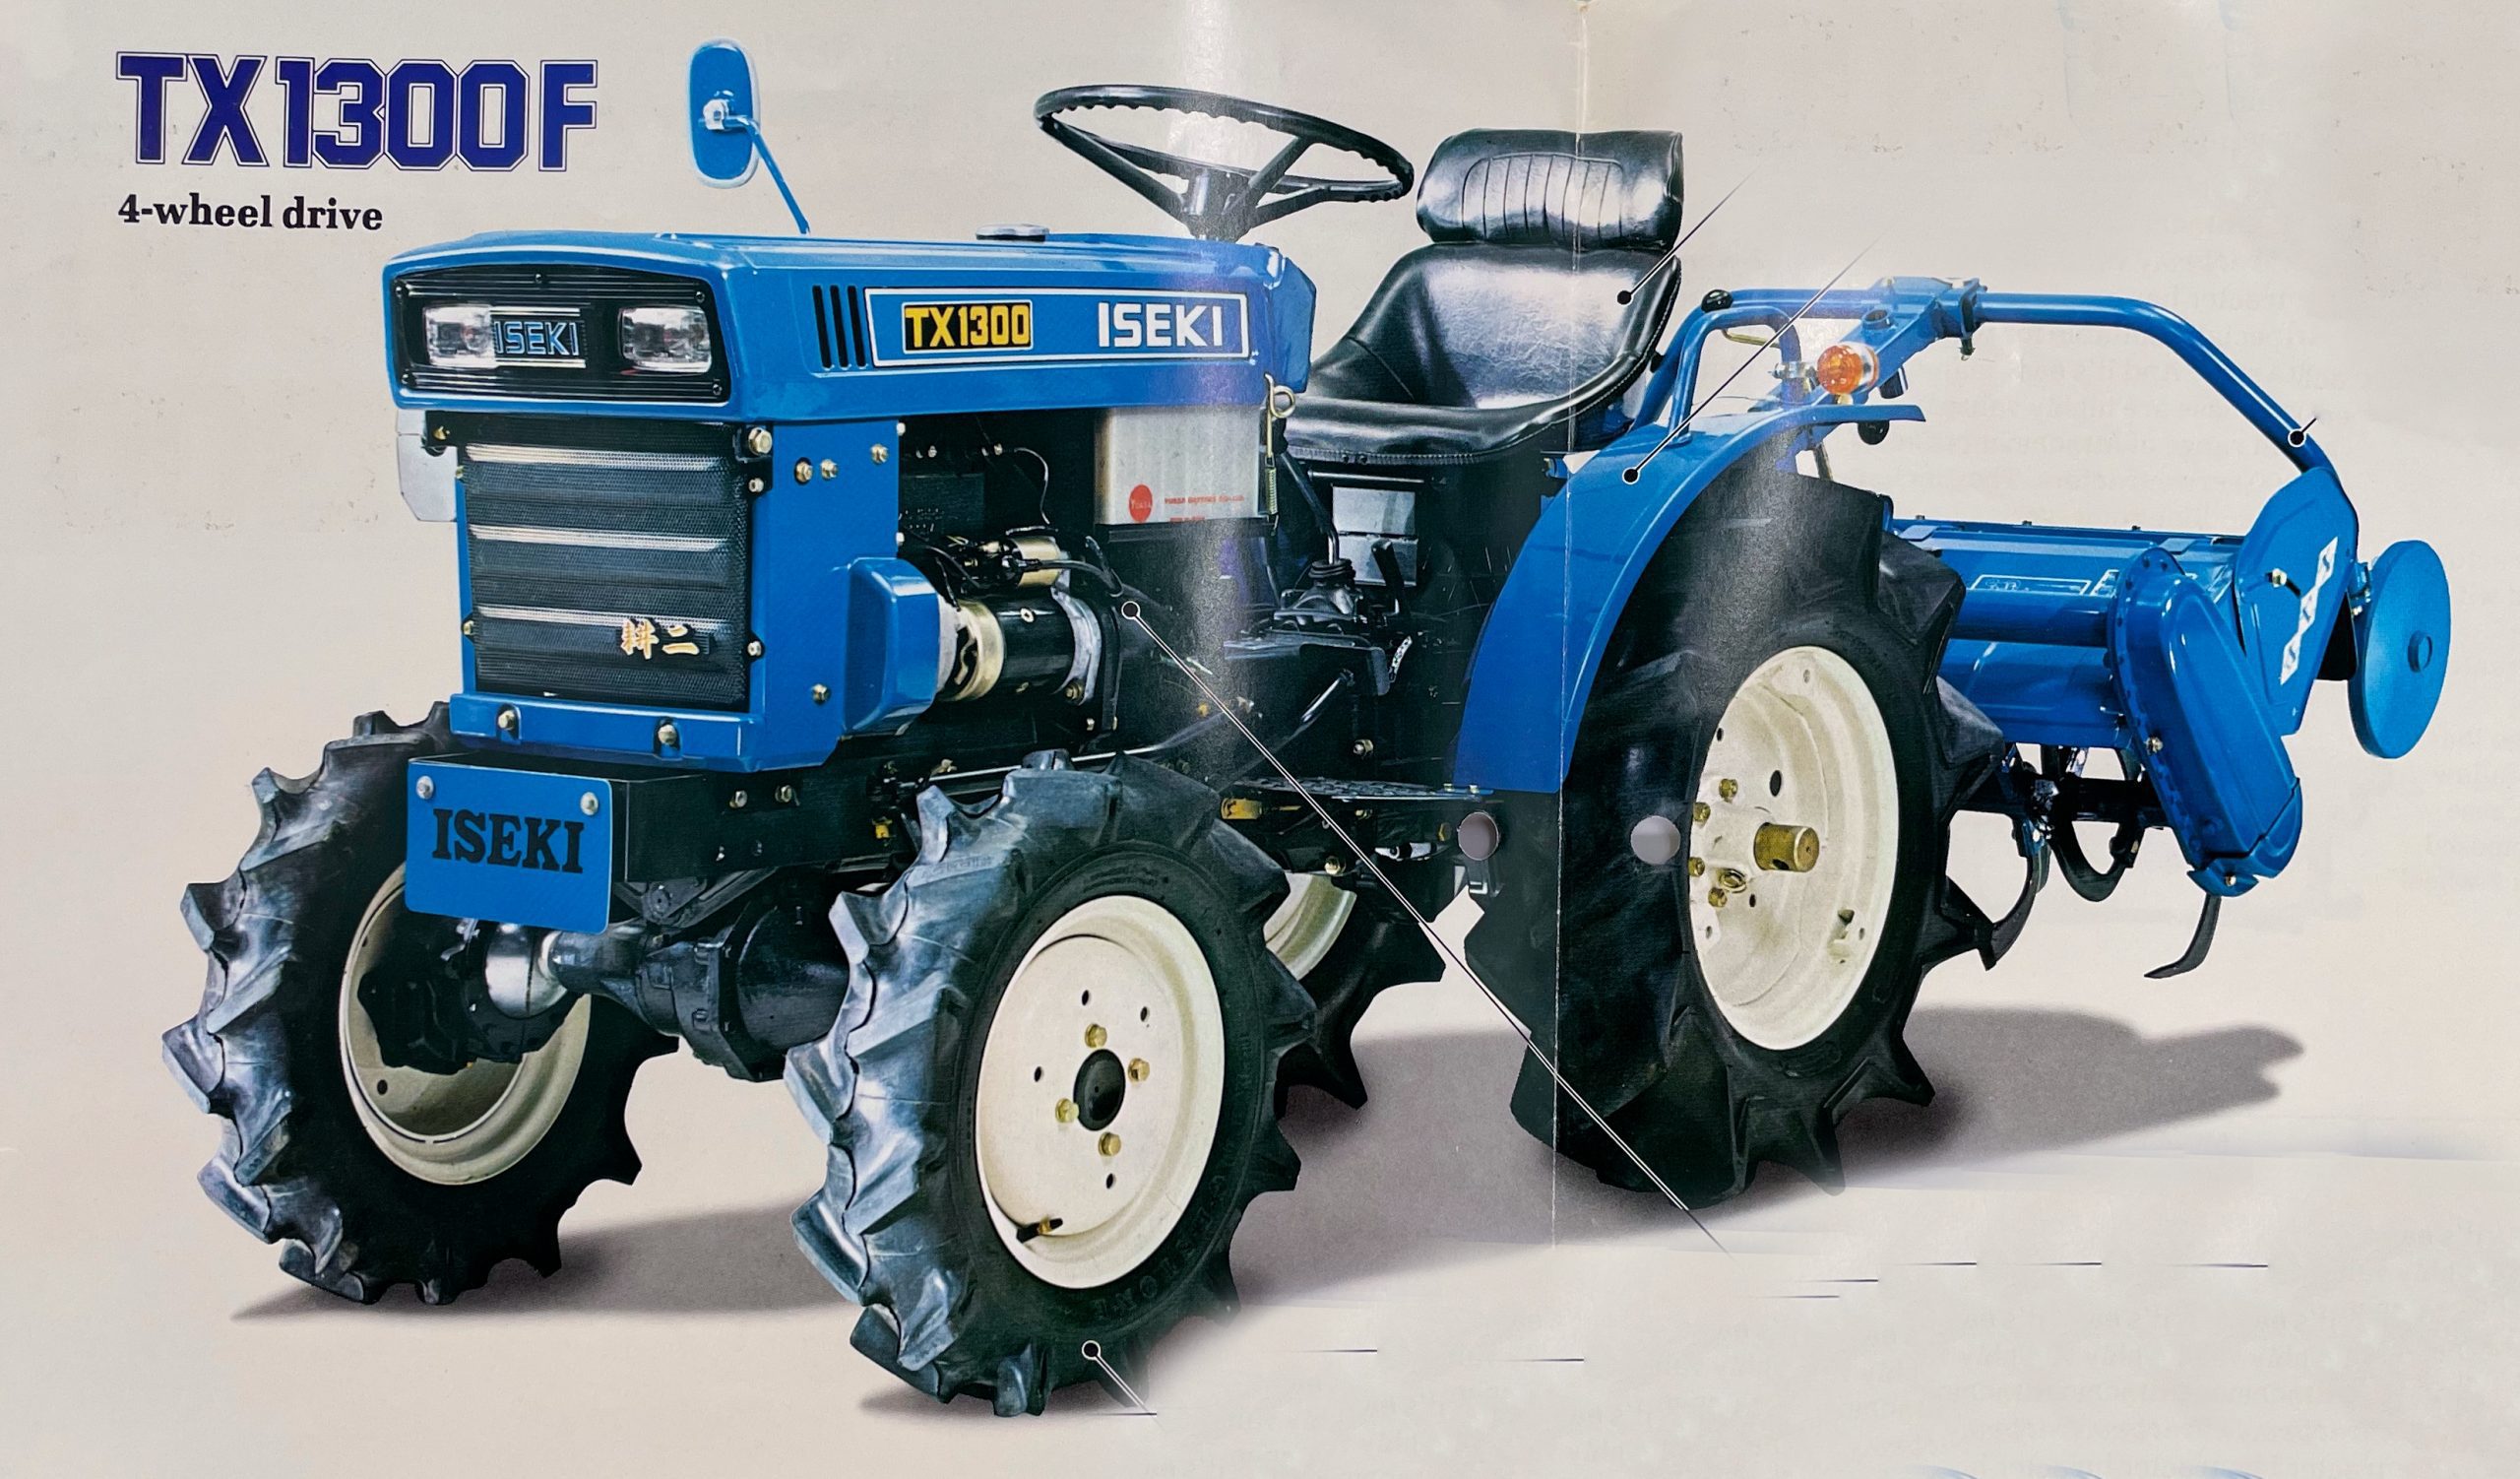 Production started 43 years ago now – what makes the Iseki TX1300(F) so good?